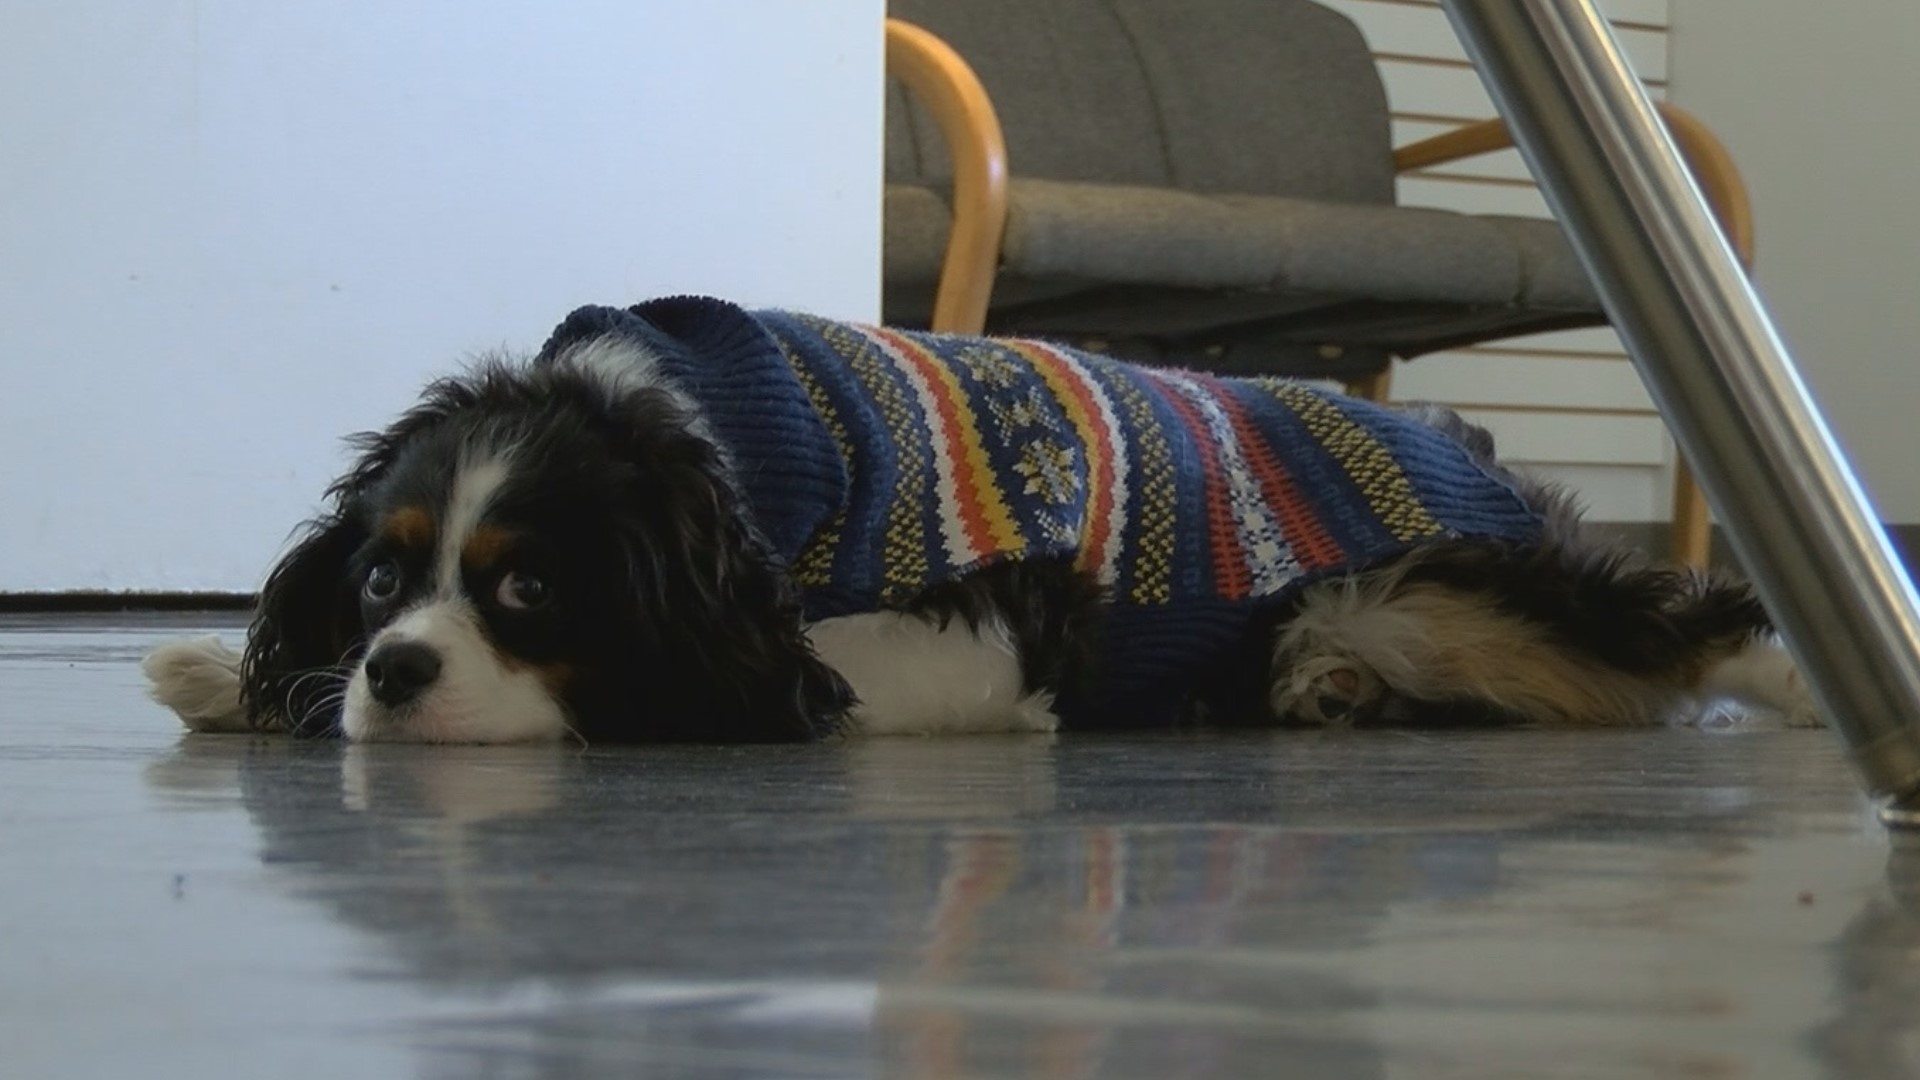 TSA brings their first therapy dog on staff. Winston is a 10-month-old Cavalier King Charles Spaniel.